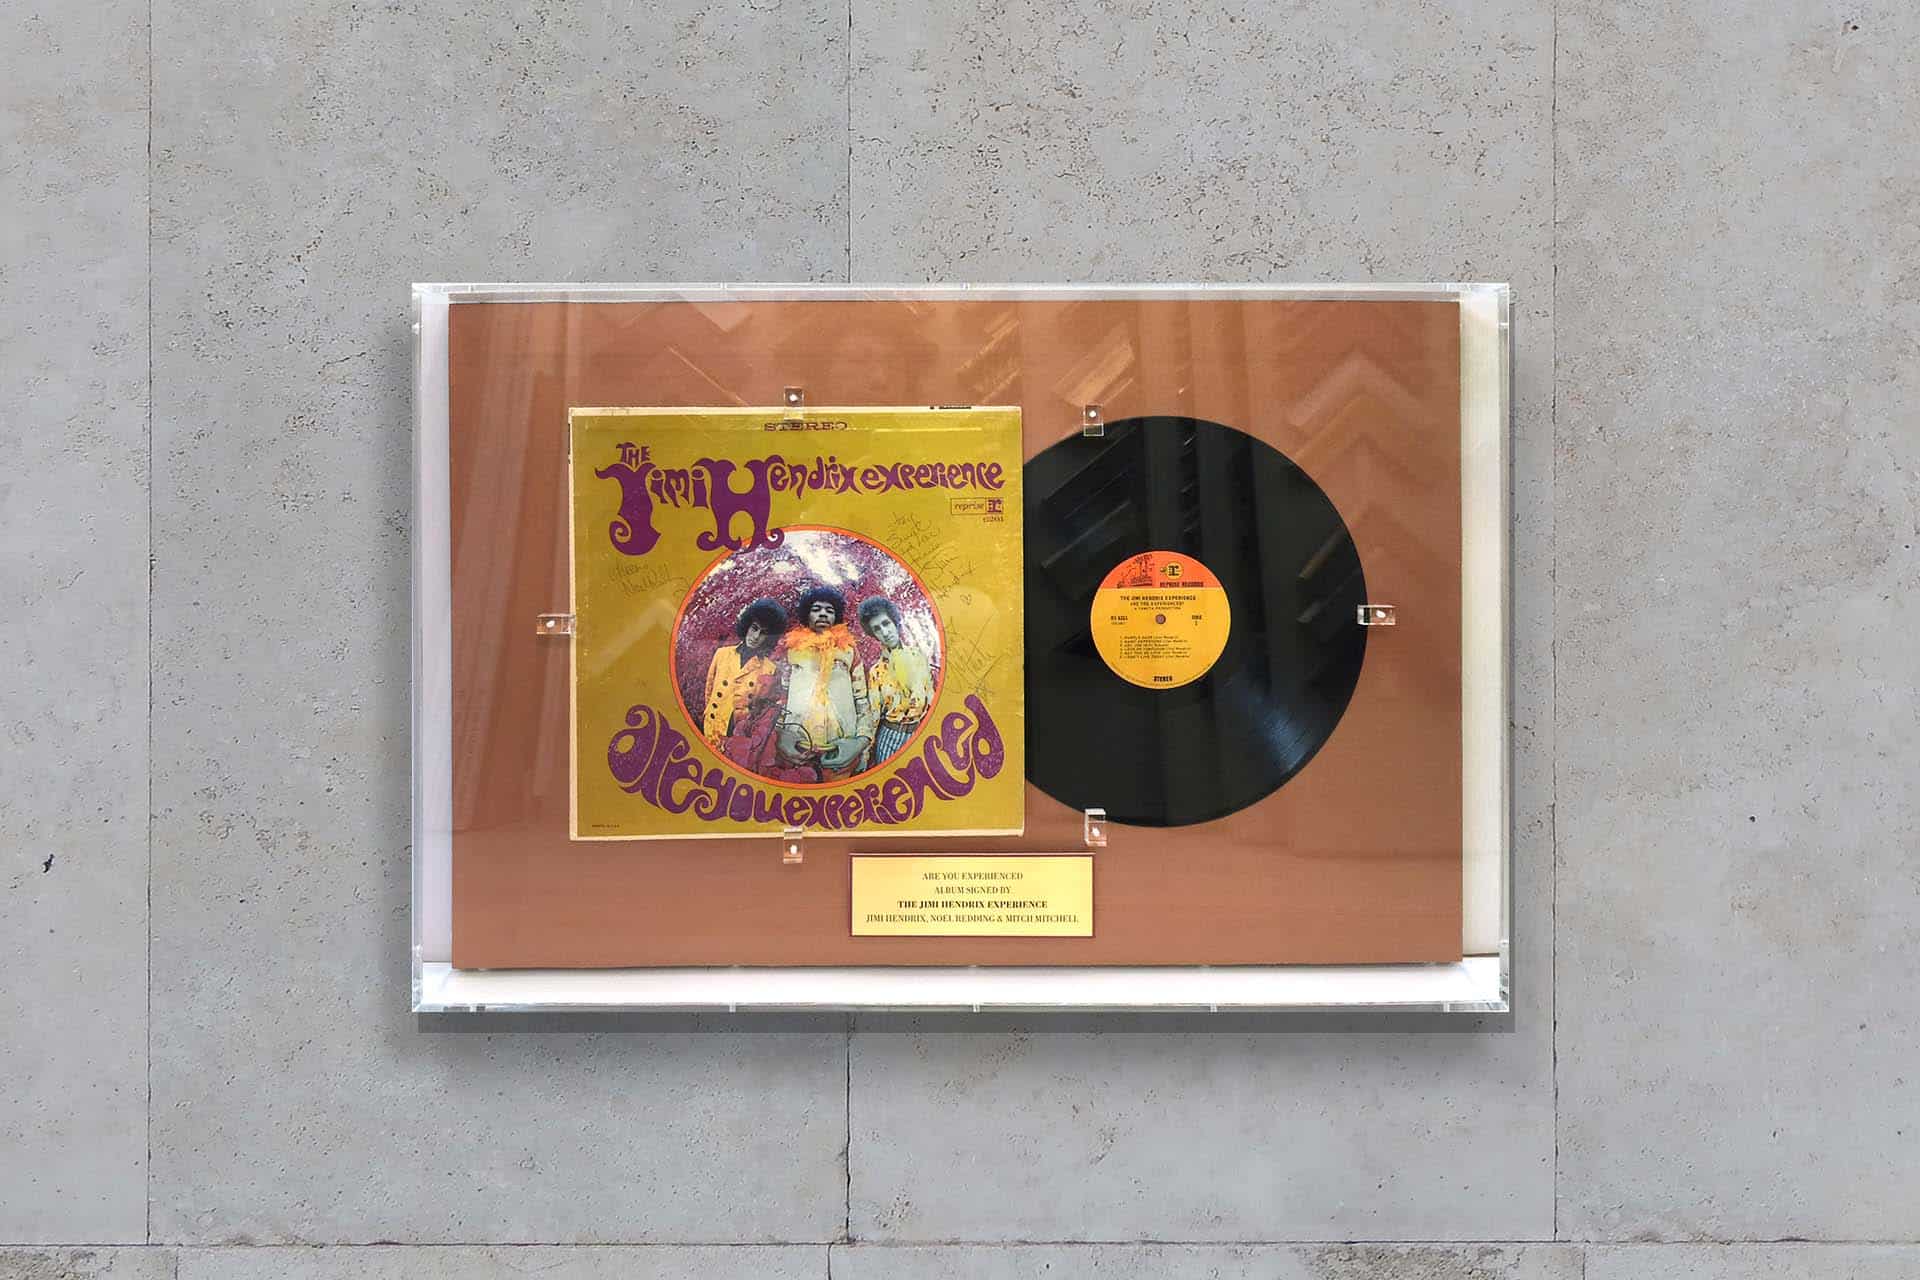 Lee Wah Framing vinyl by The Jimi Hendrix Experience framed in white box frame